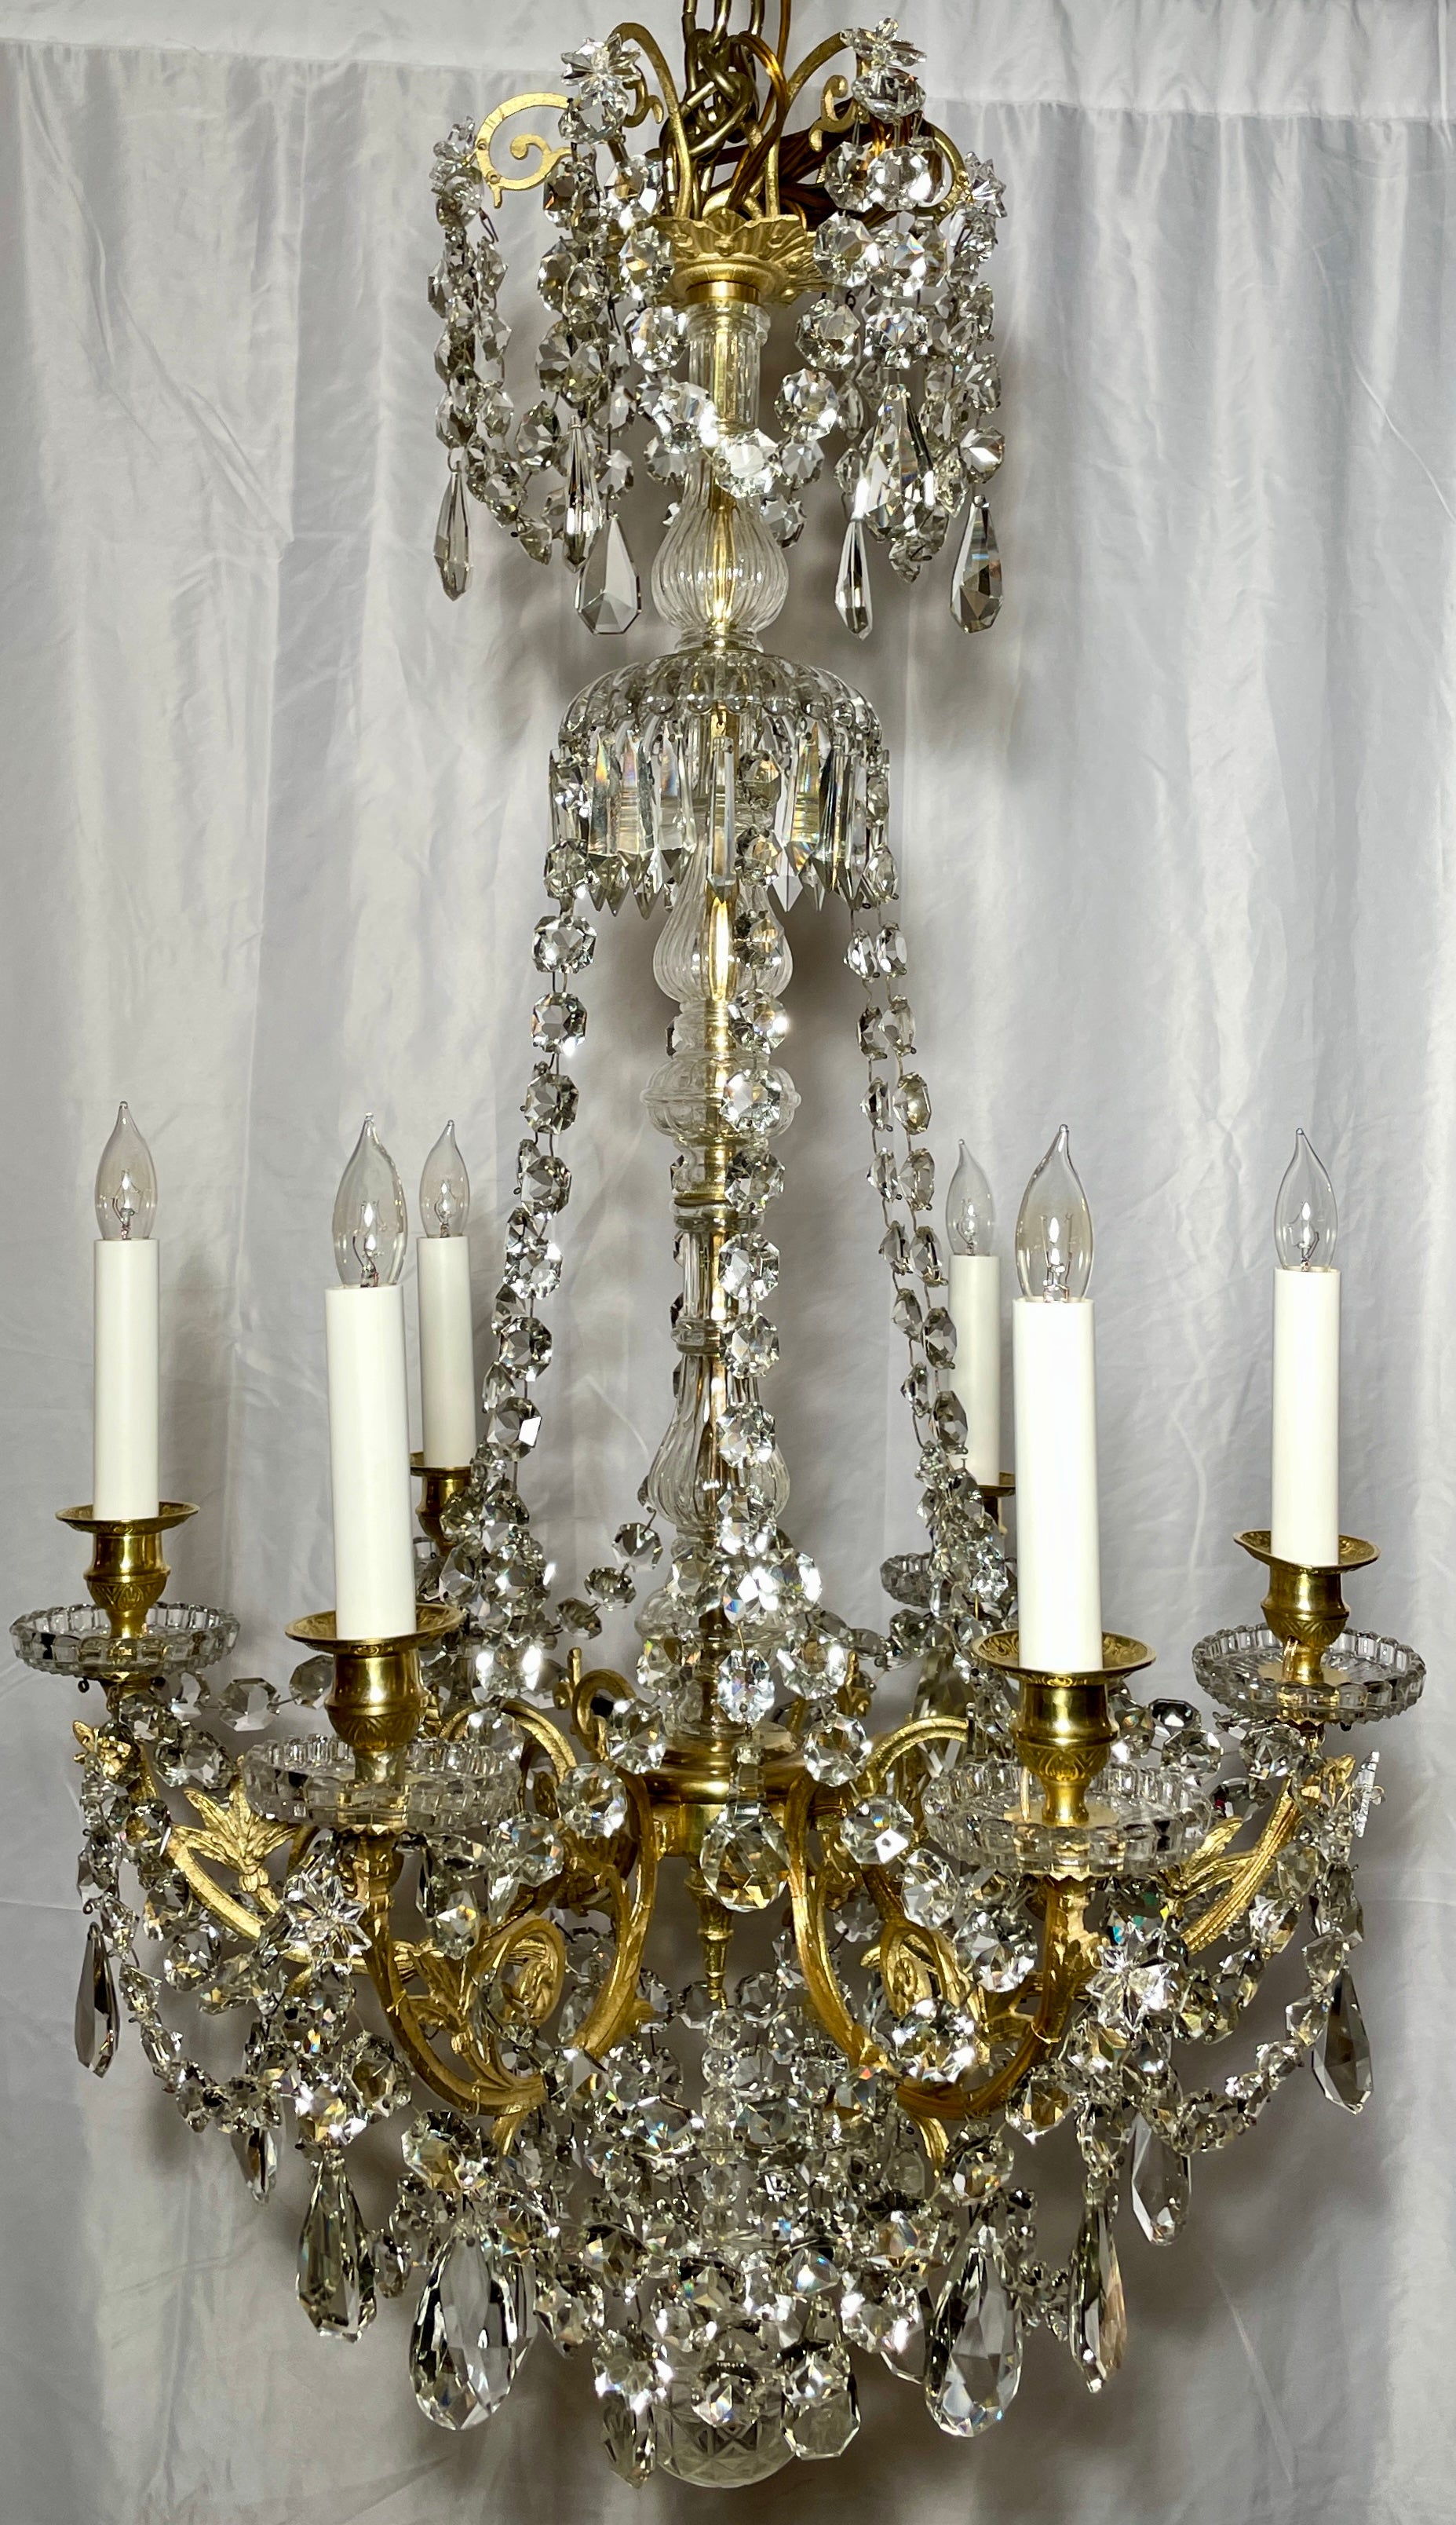 Antique 19th century French Napoleon III bronze d' ore and crystal chandelier. 